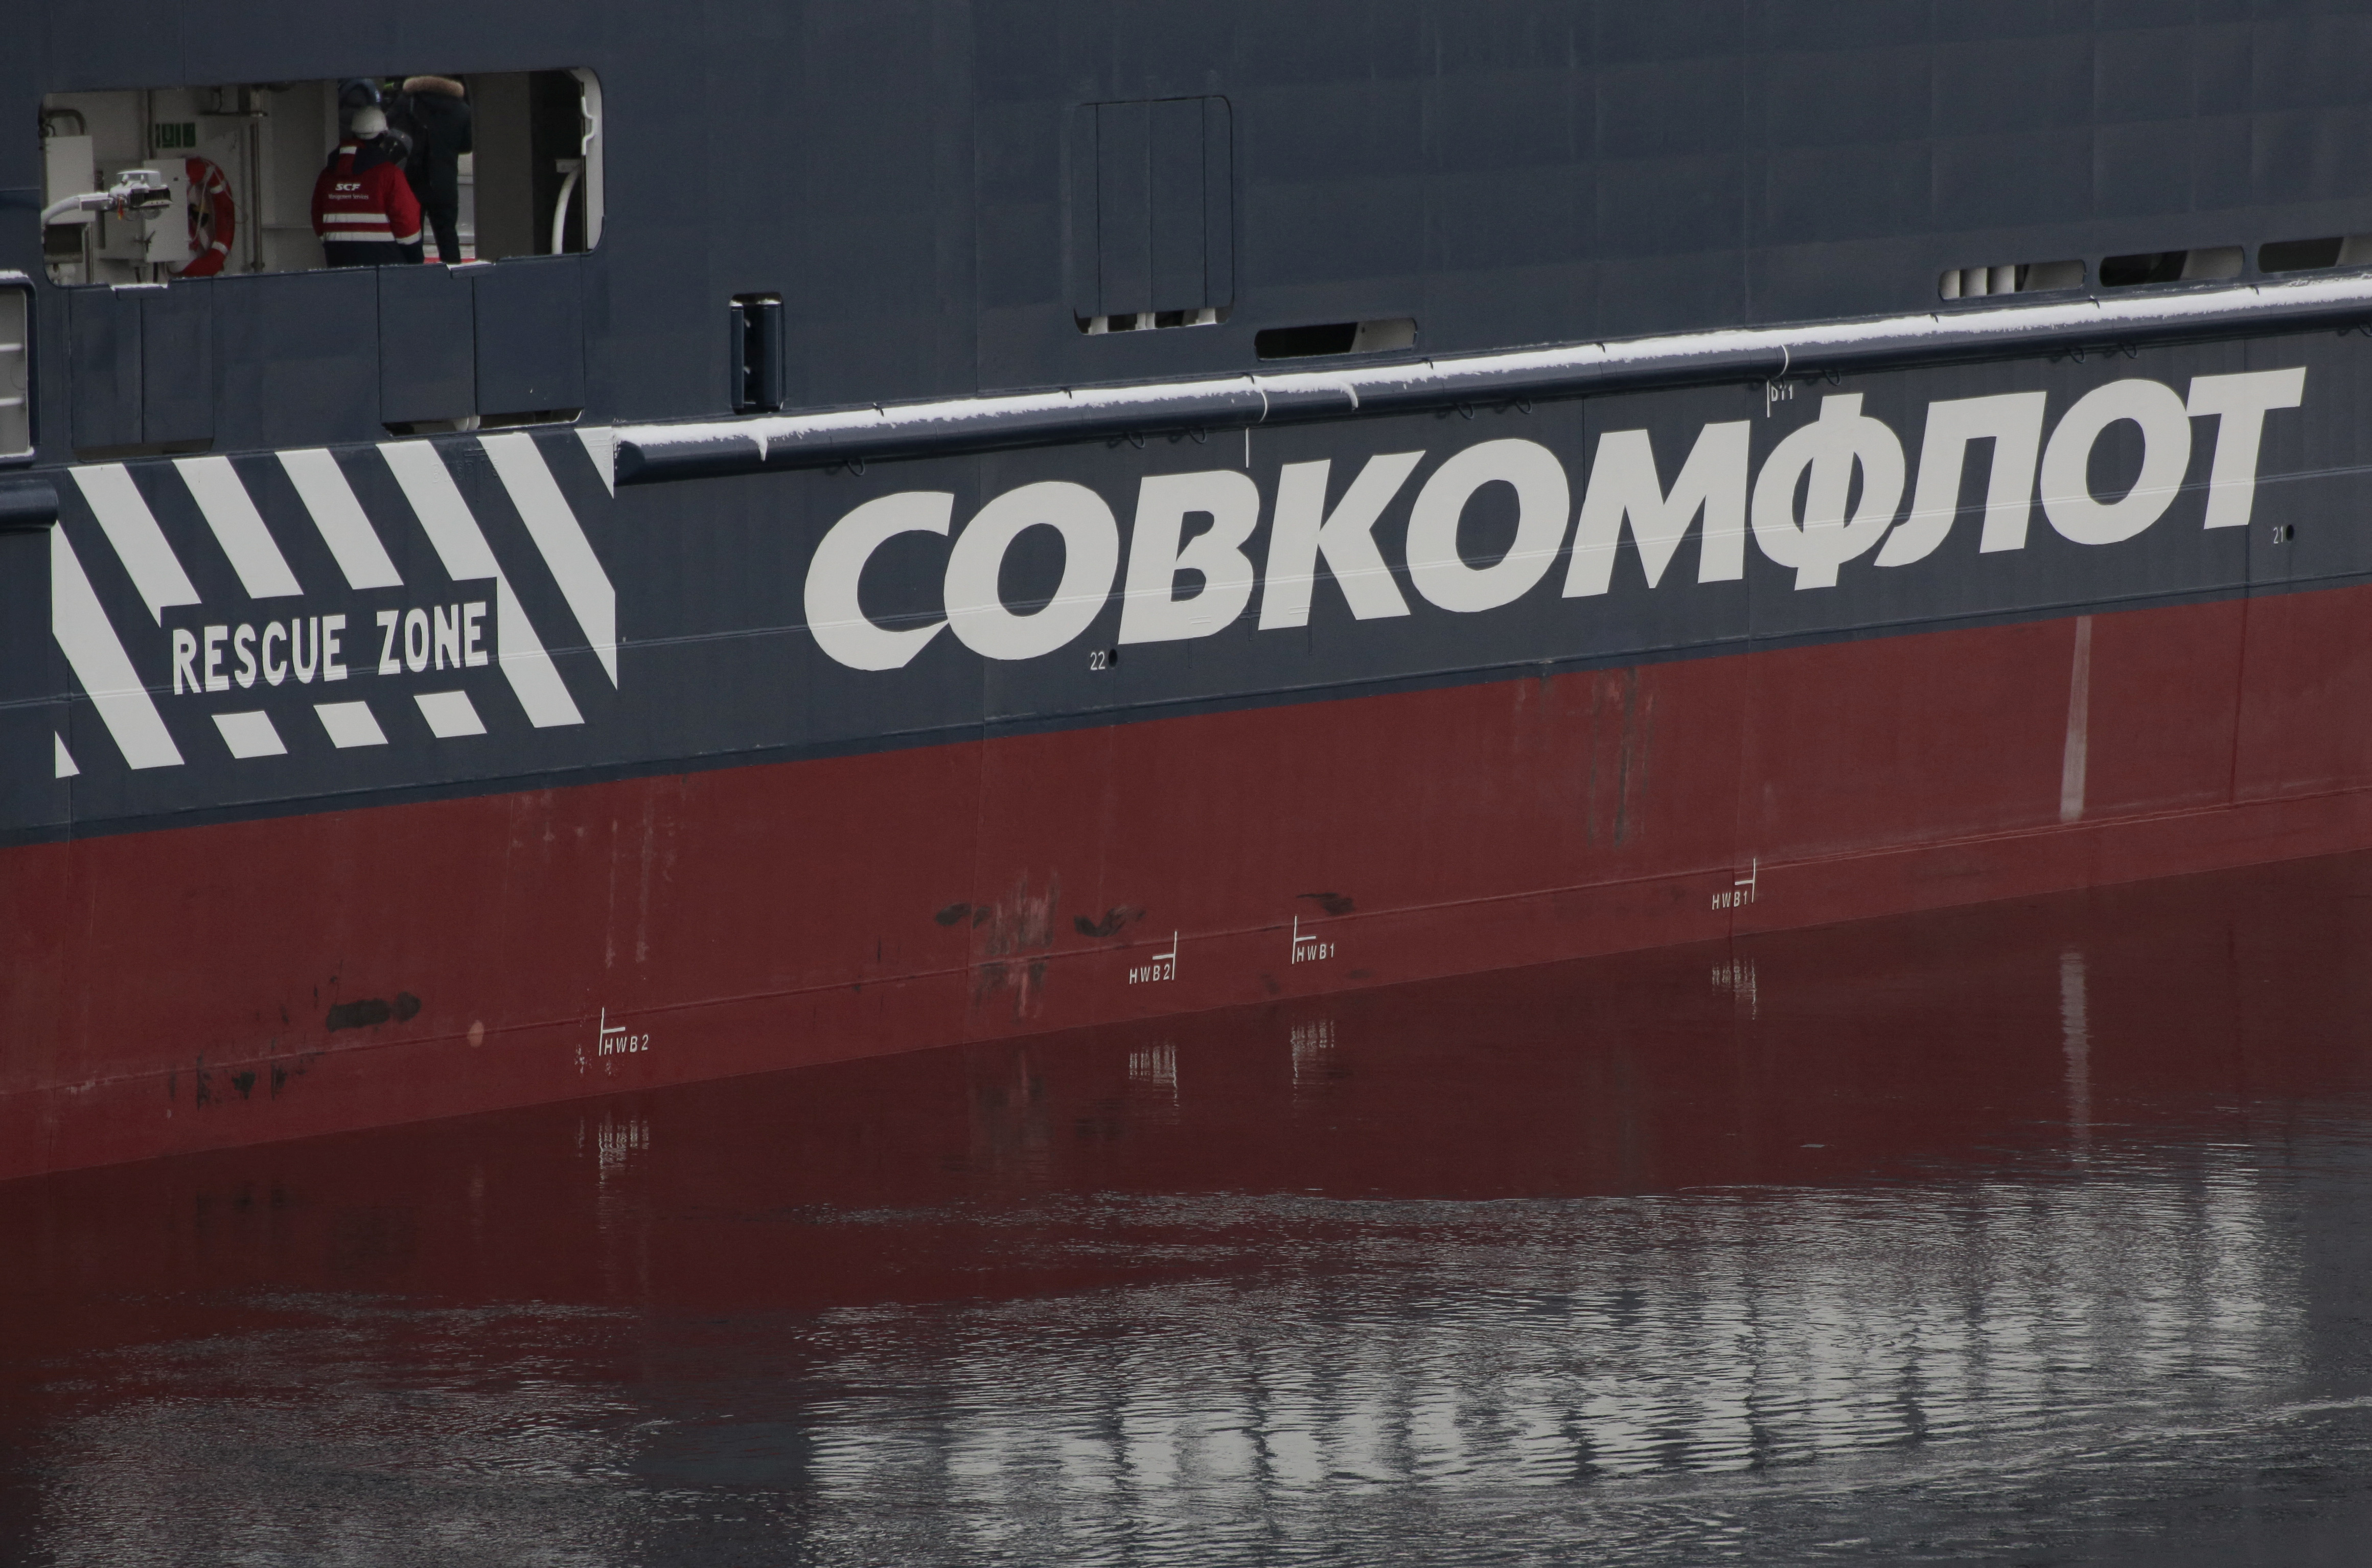 The logo of Russian state shipping company Sovcomflot is seen on the multifunctional icebreaking standby vessel 